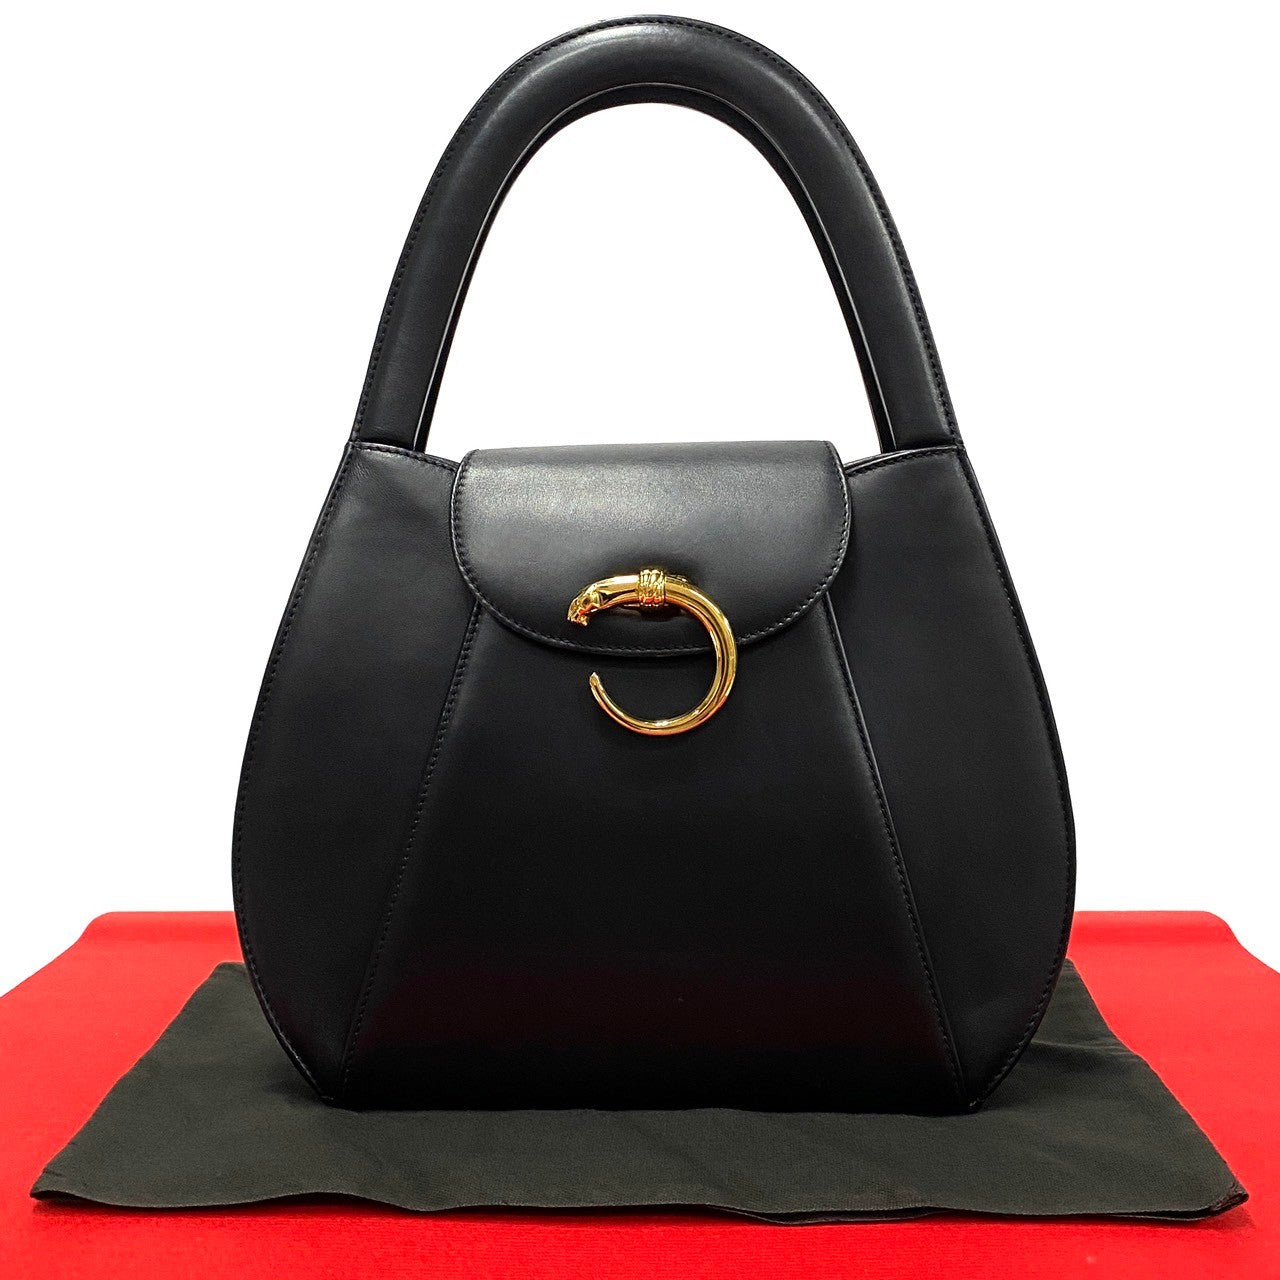 Cartier PANTHERE Black Leather Handbag Leather Handbag in Good condition